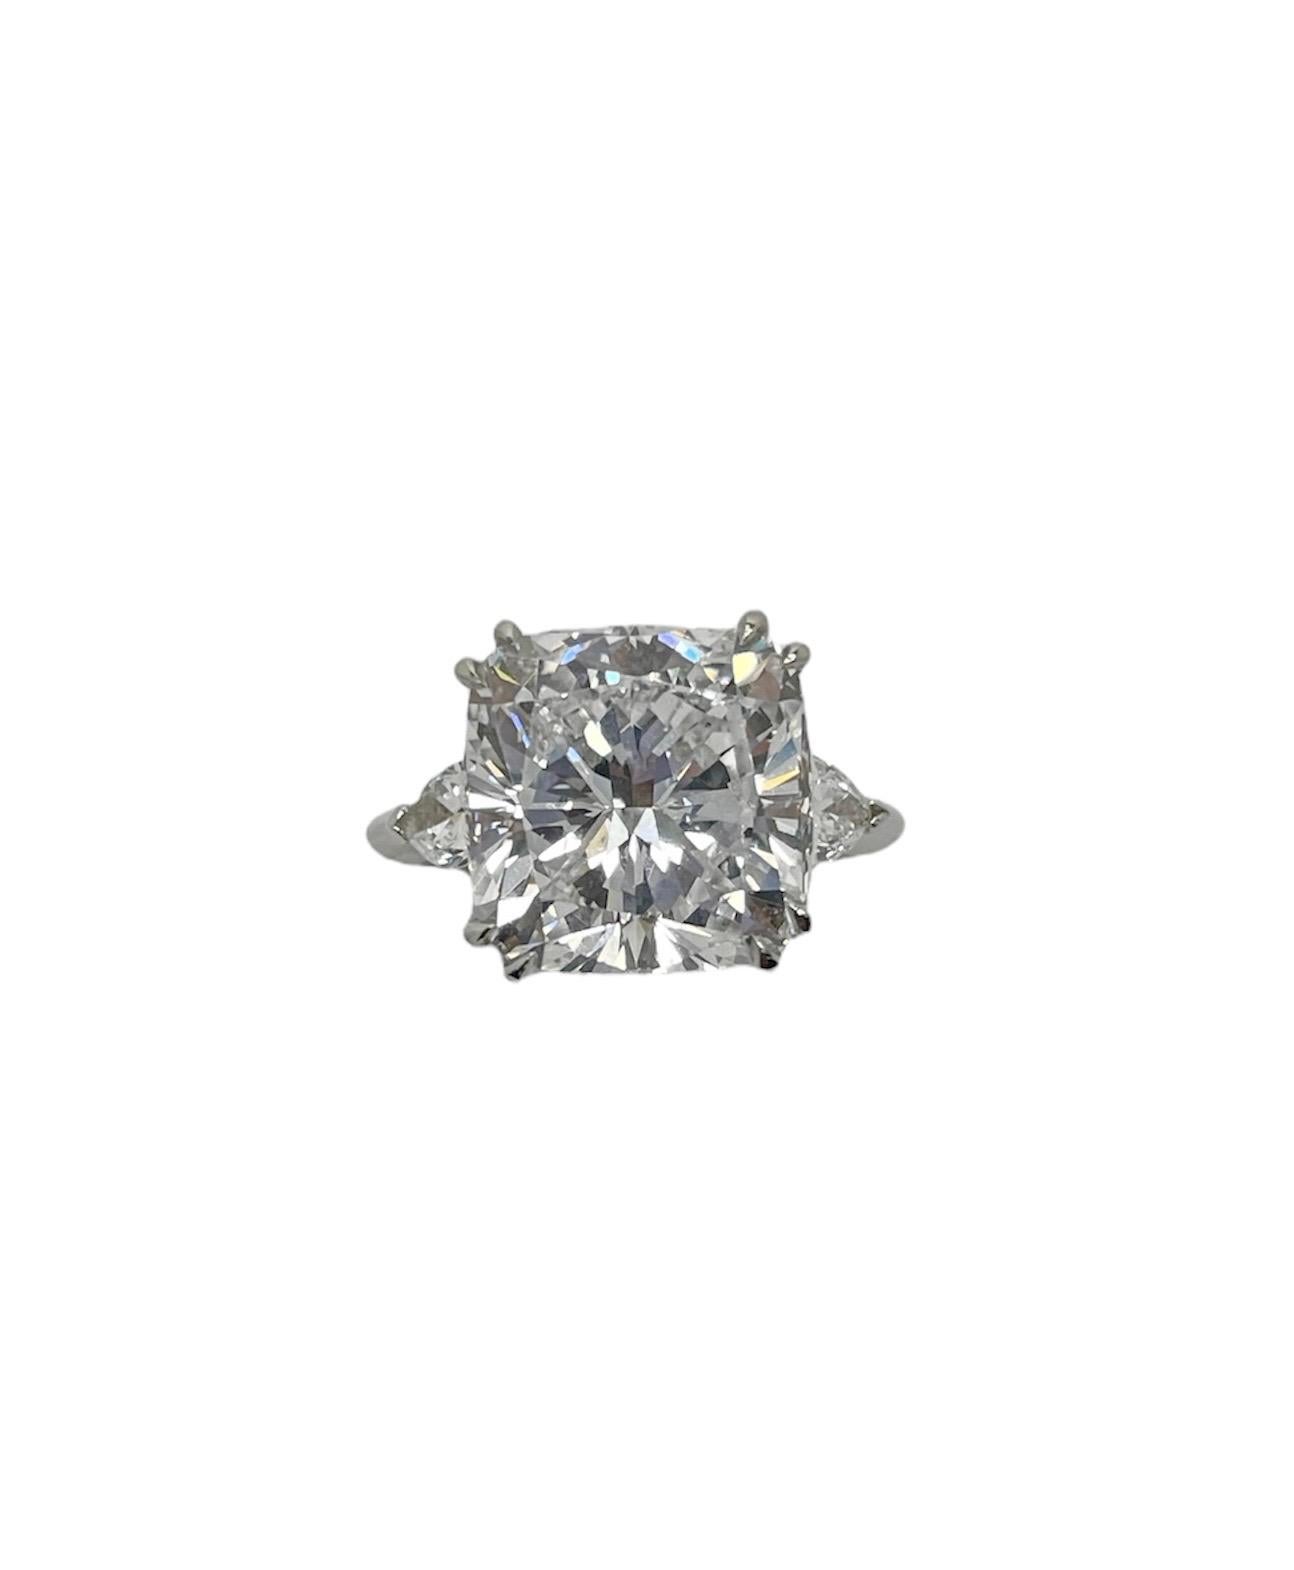 This absolutely stunning ring features a 9.27 carat cushion modified brilliant cut diamond with D color and SI1 clarity, flanked by pear shaped diamonds weighing approximately 0.80 carat total. Mounted in platinum and skillfully crafted, this ring